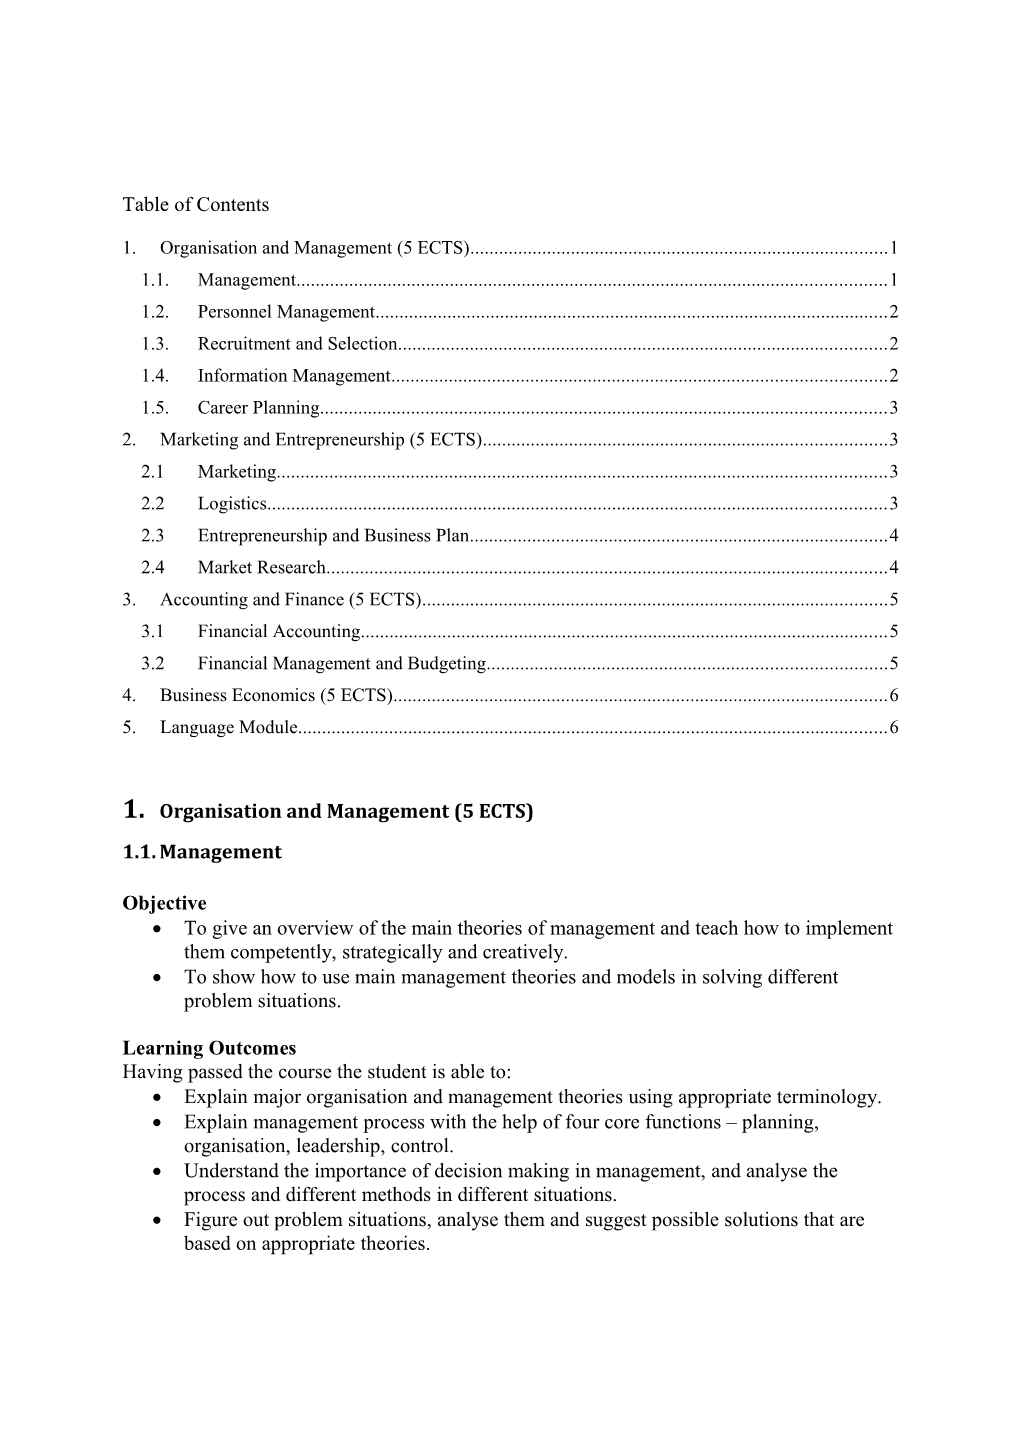 1.Organisation and Management (5 ECTS)